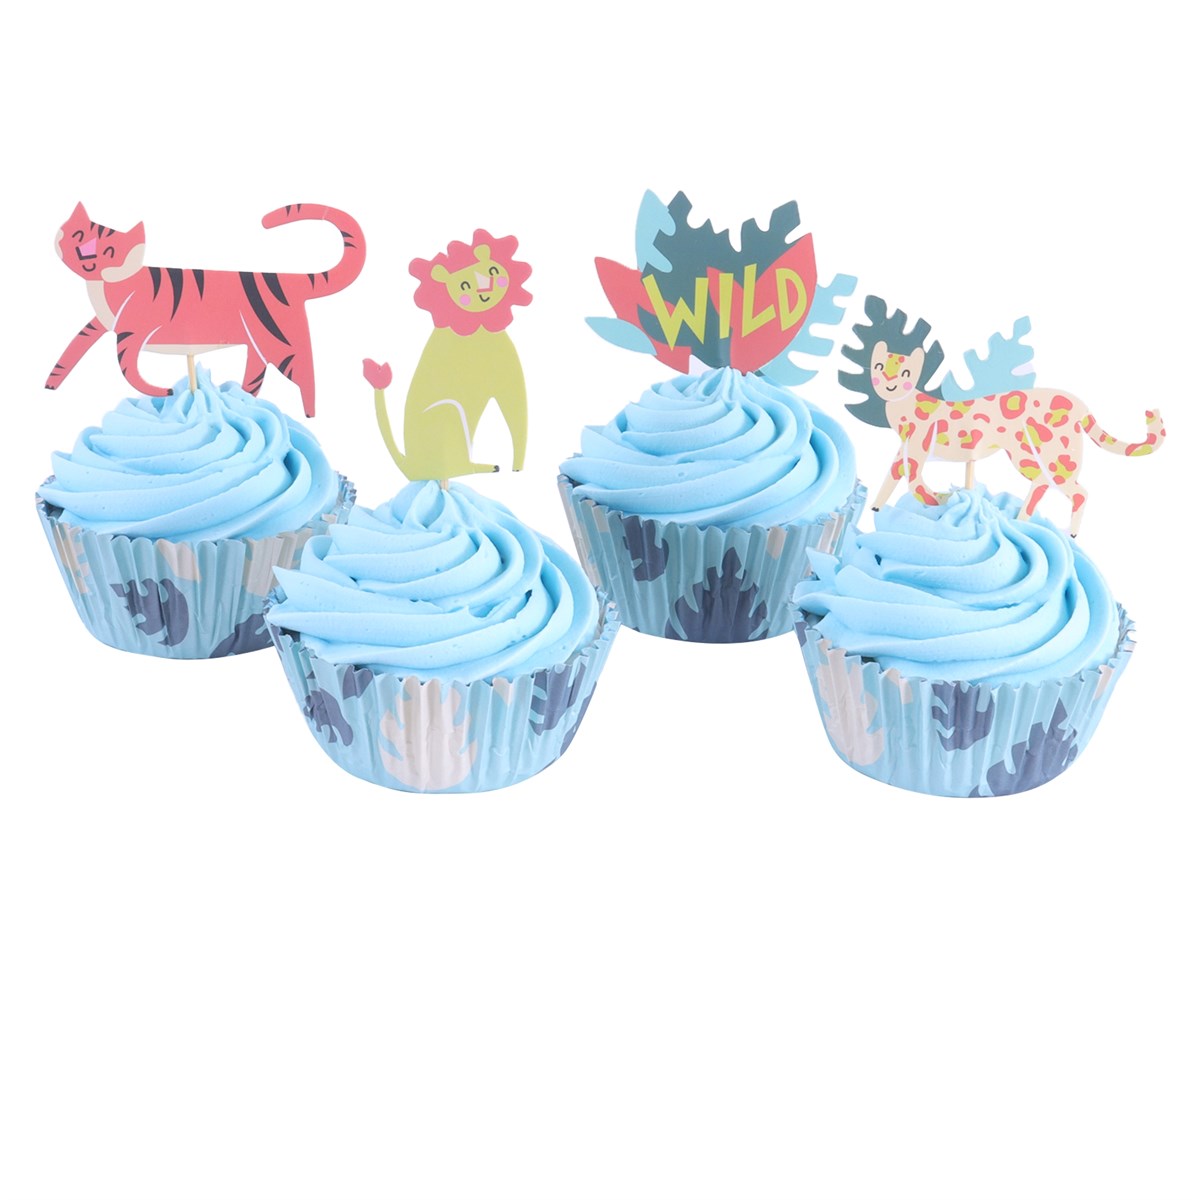 Cupcake Set - Go Wild Safari Animals (24 Cases and Toppers)